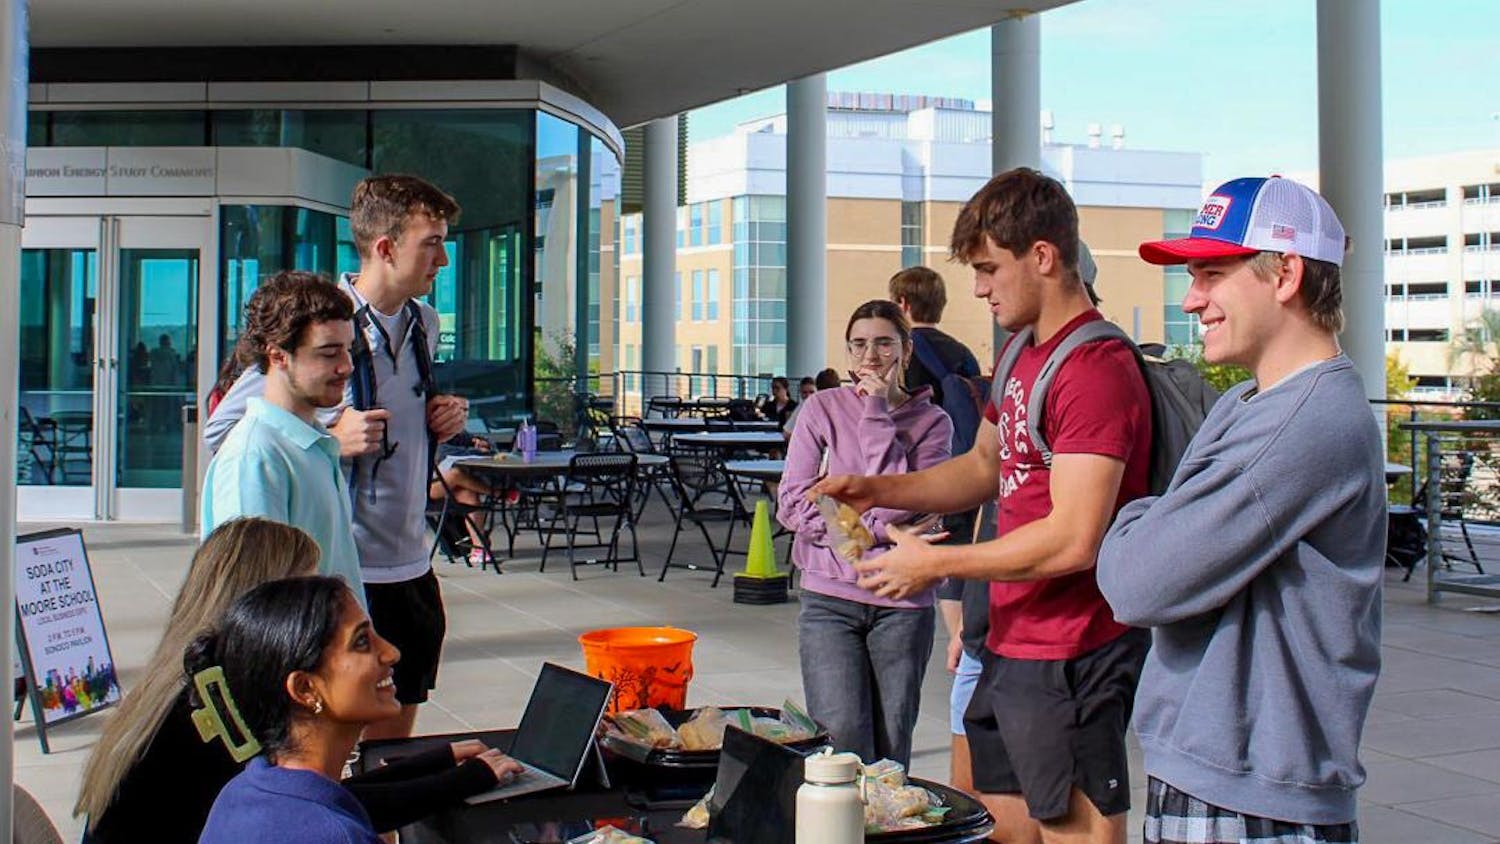 Student Government senators (left to right) Sreshta Ravi, Tyler Morgan and Patrick Koon talk to students in the breezeway outside of the Darla Moore School of Business on Oct. 24, 2023. The Student Government Food for Thought initiative asked students to share any ideas, complains or concerns they have with campus-related issues in exchange for chicken minis provided by Student Government.